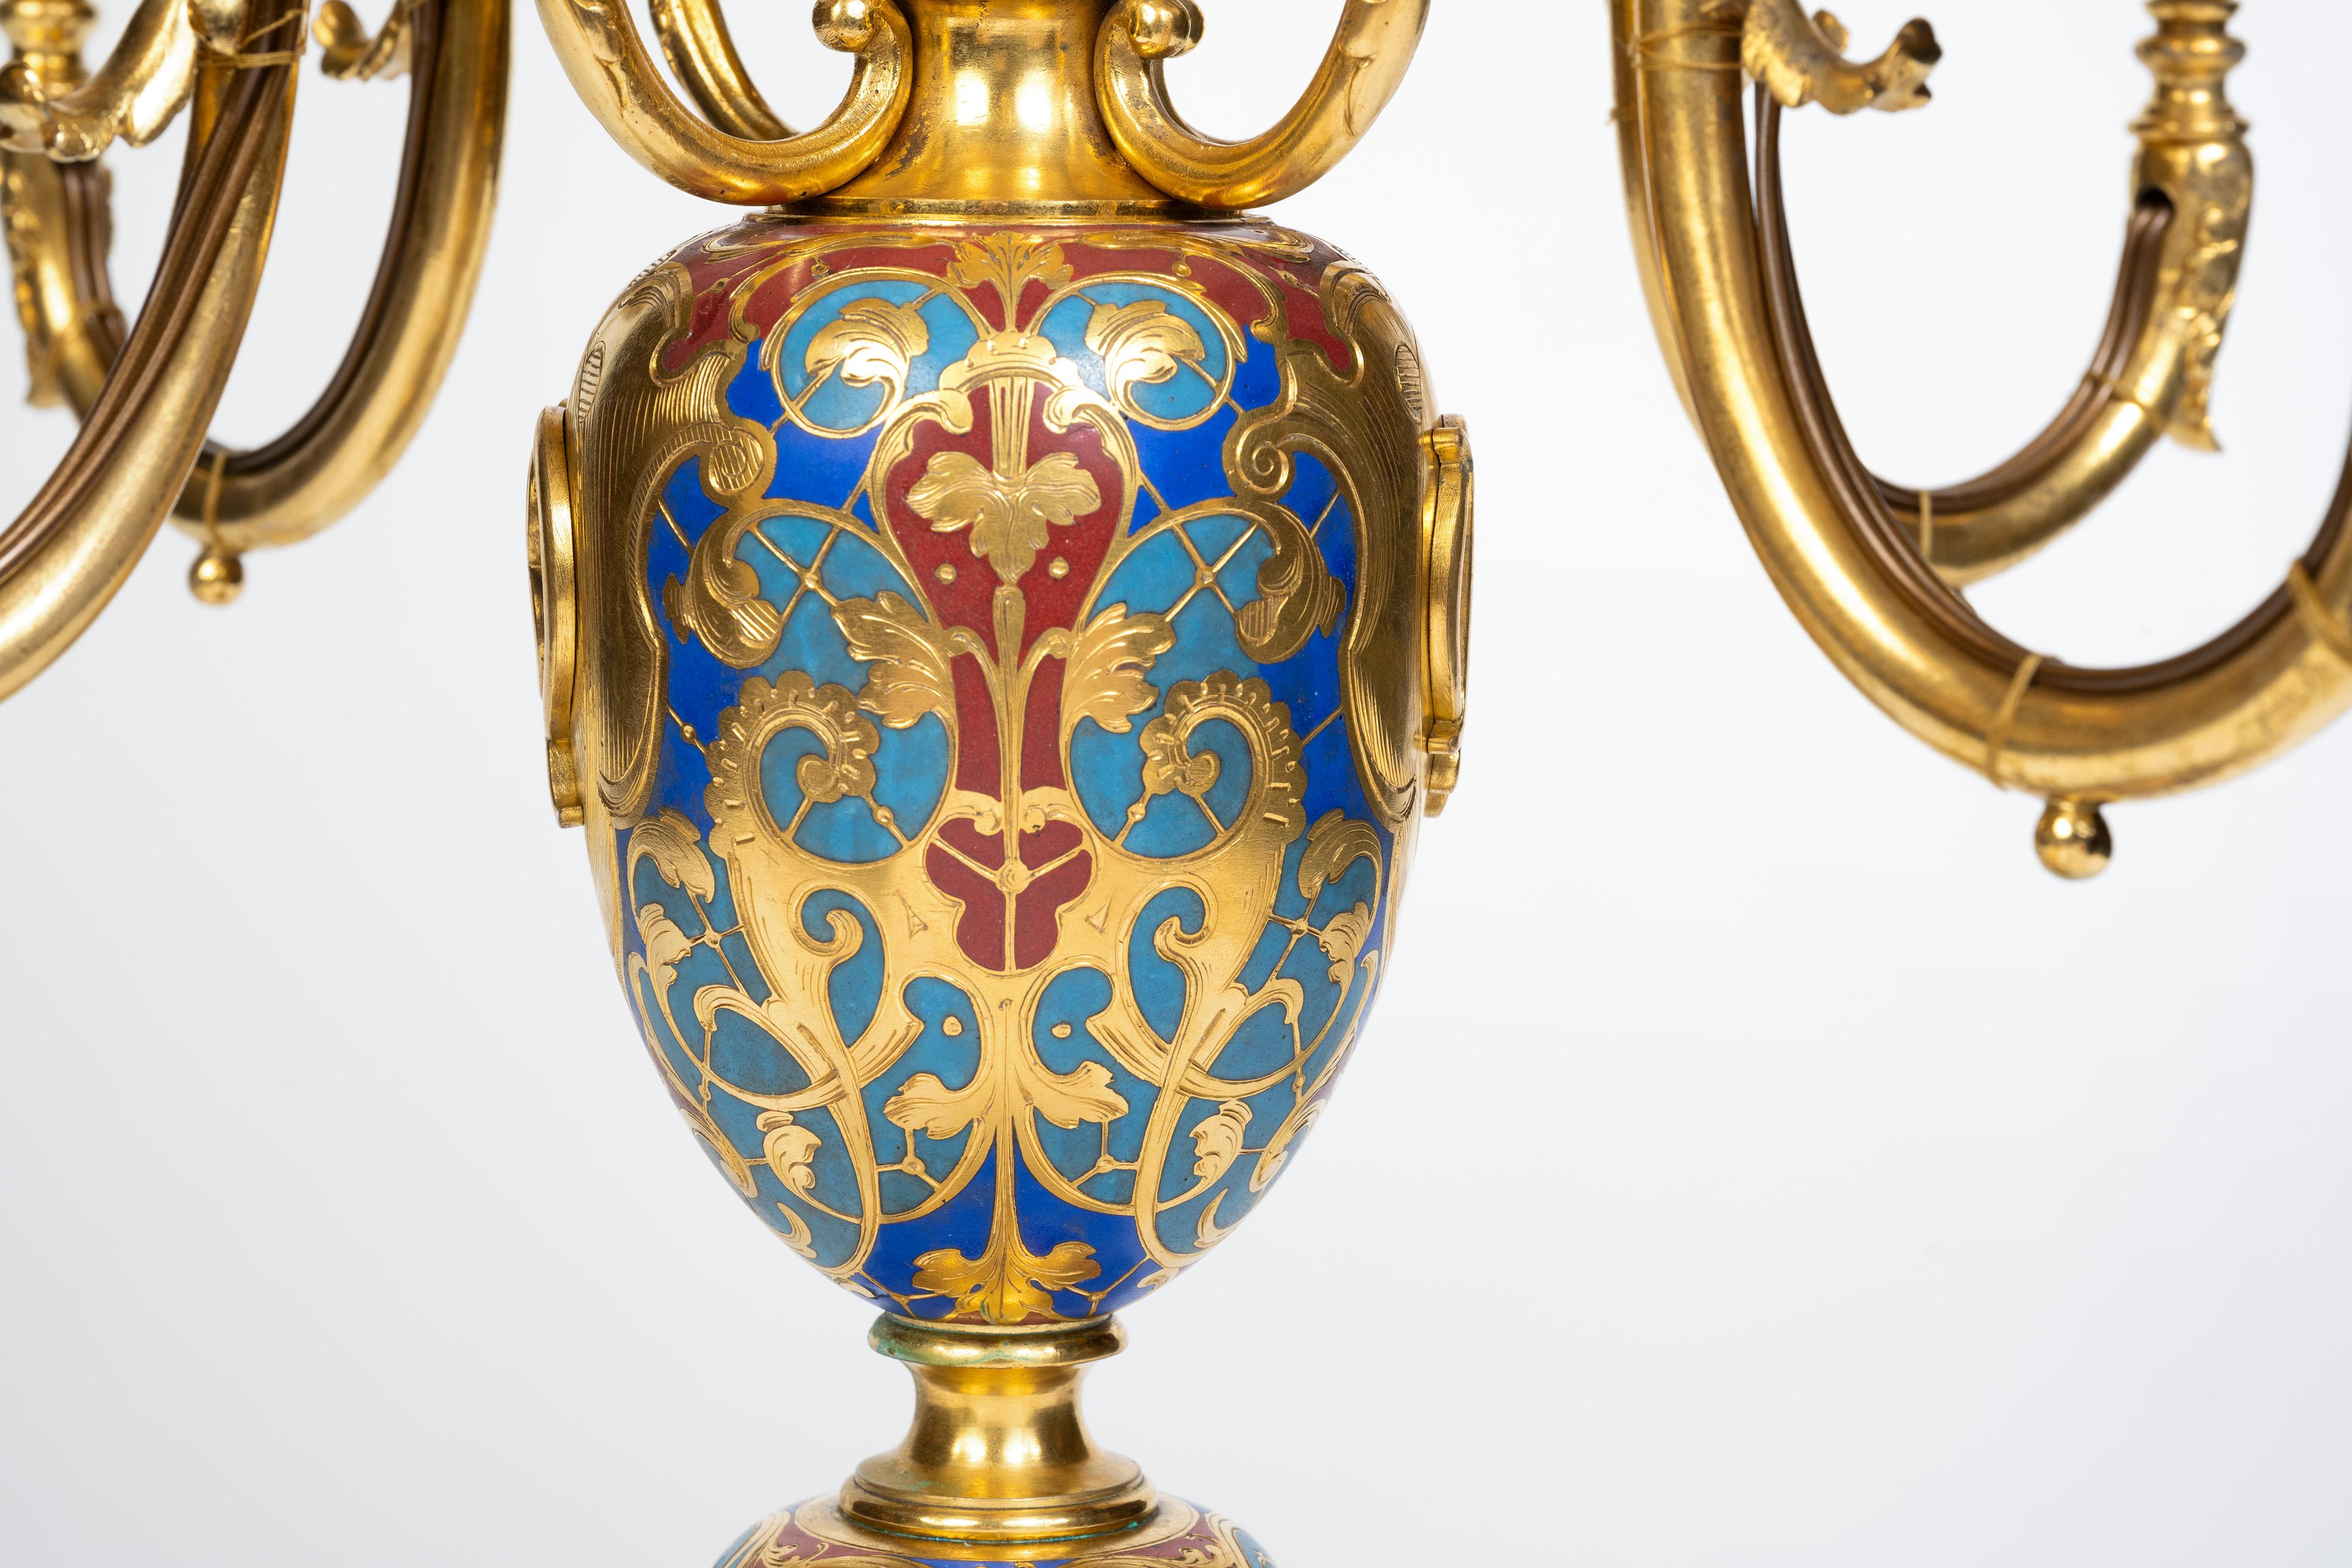 An Exceptional Pair of Champleve Enamel Ormolu Candelabra by Sevin & Barbedienne For Sale 7